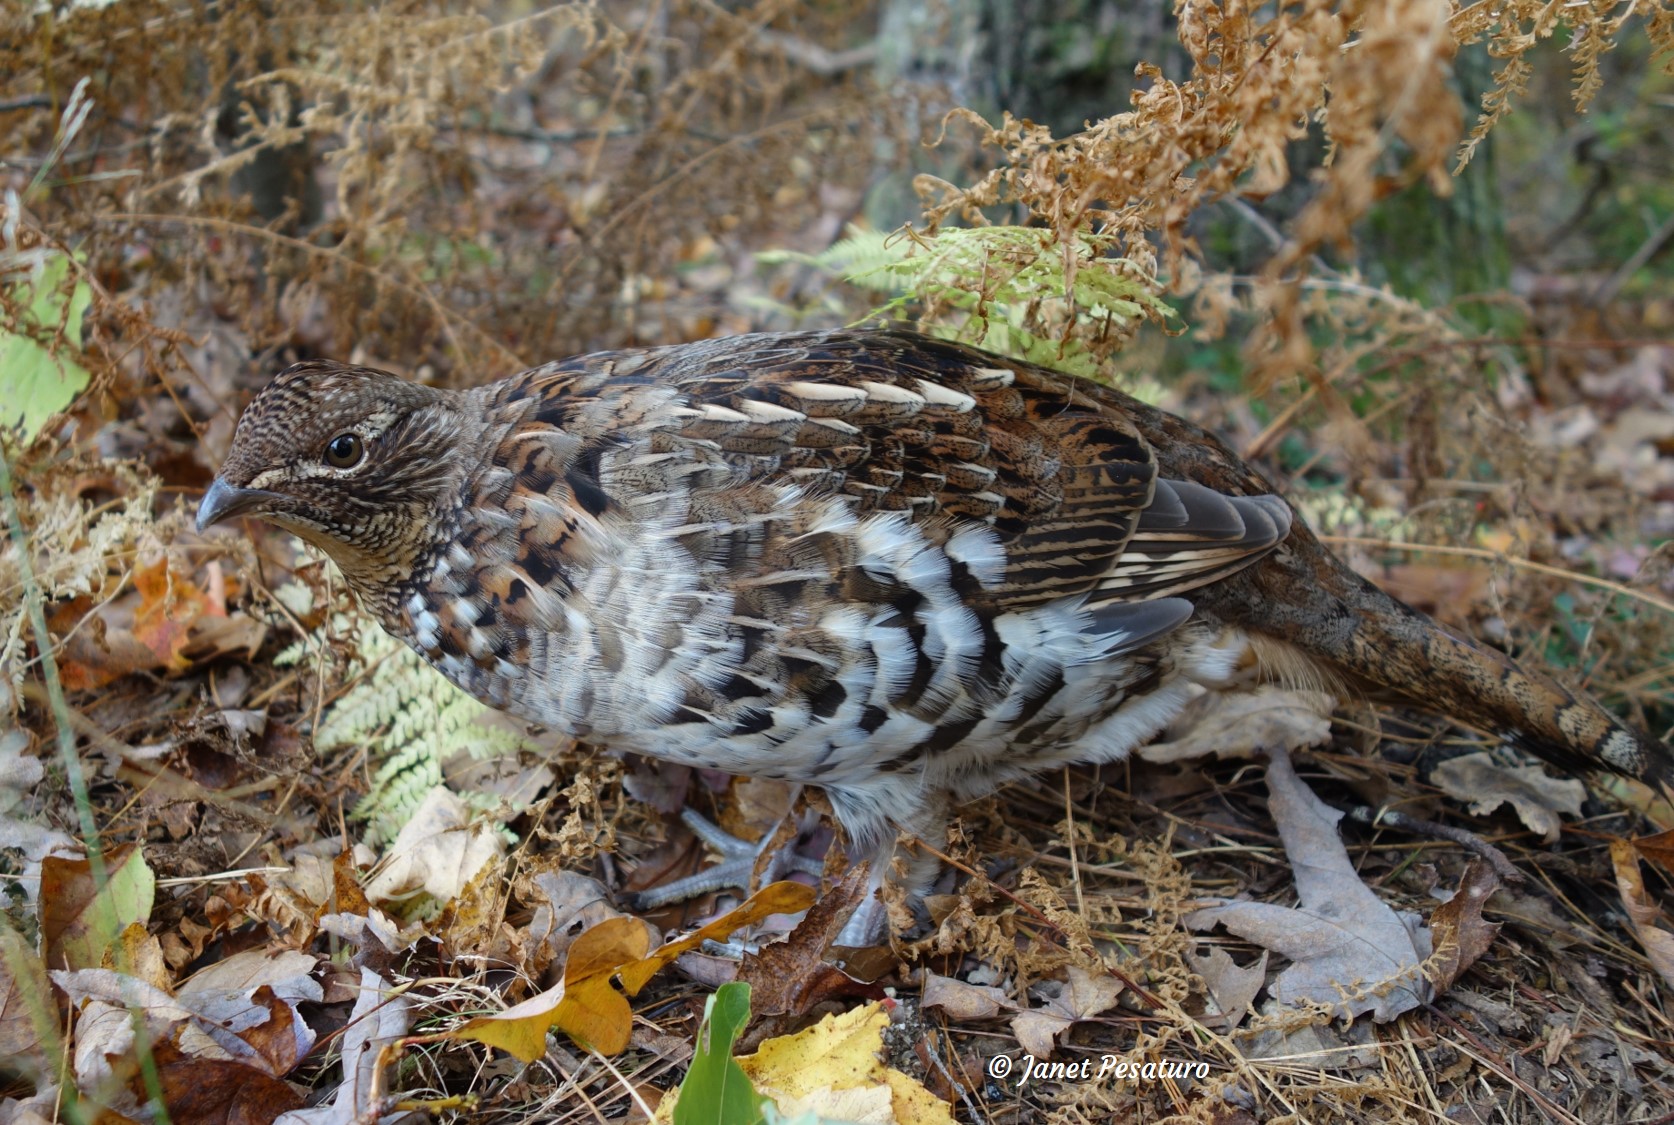 territorial, aggressive ruffed grouse could be photographed at close range